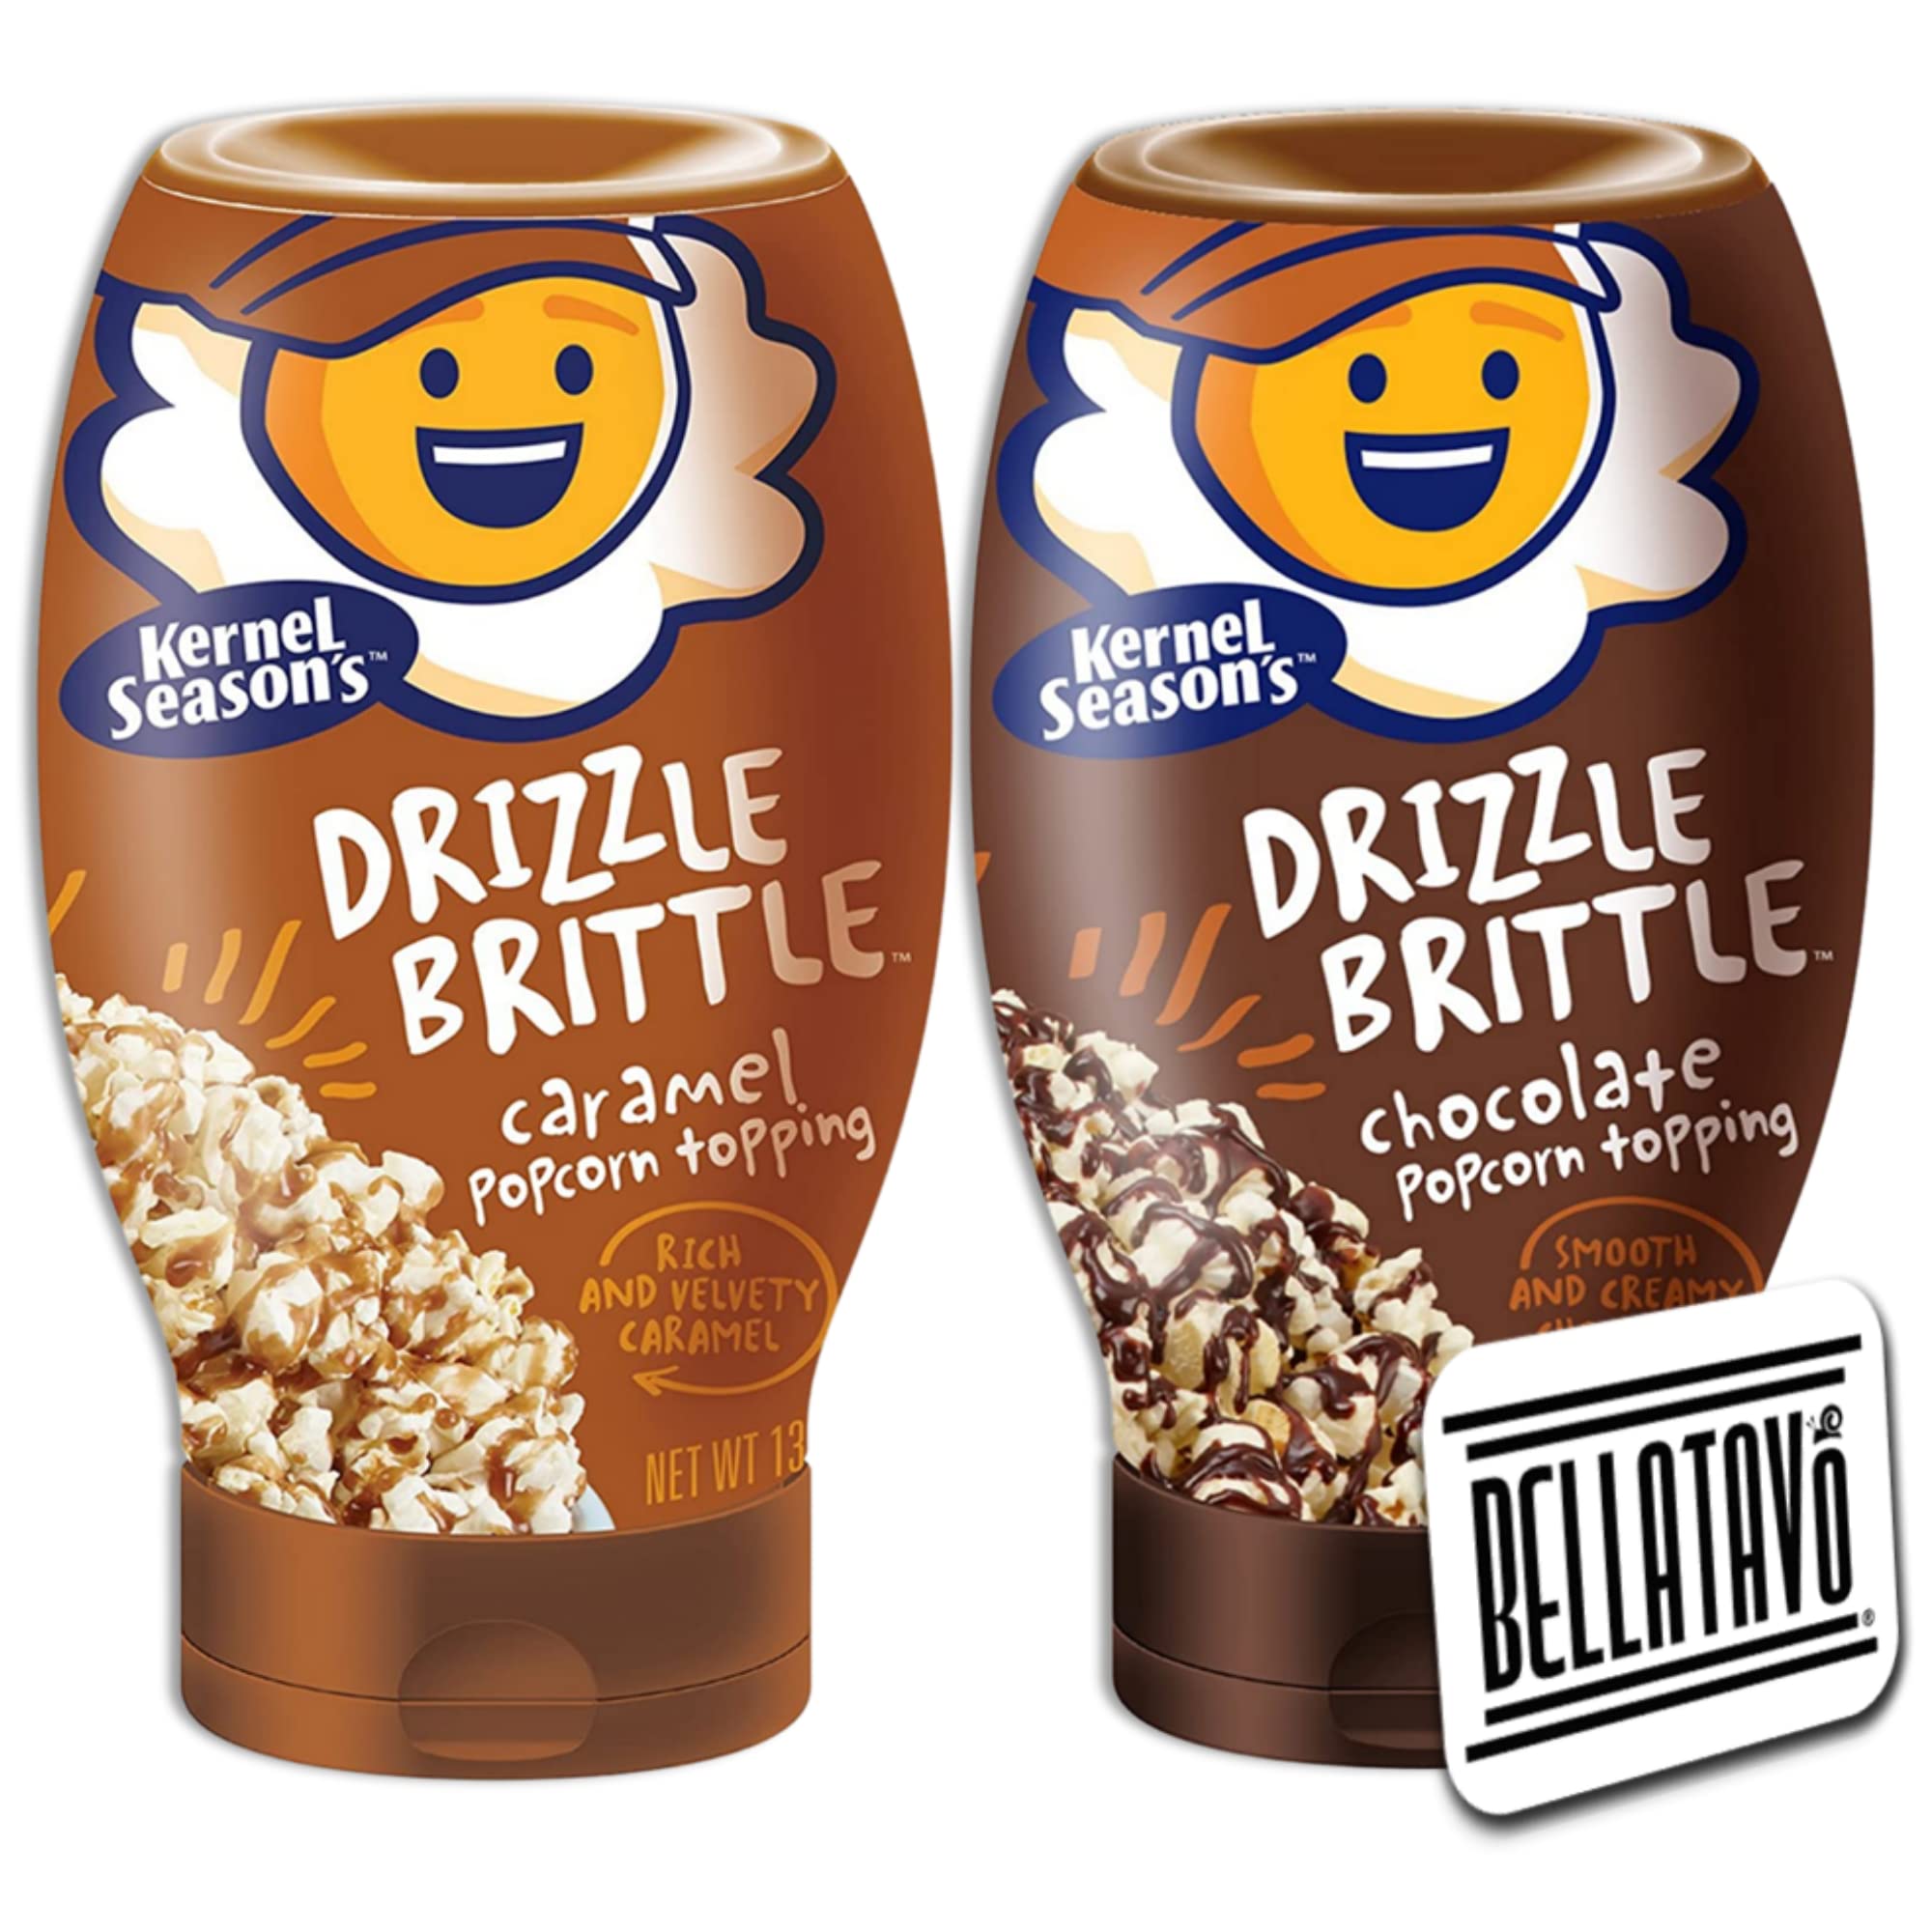 BELLATAVO Popcorn Drizzle Sauce Bundle. Includes Two-13.1 Oz Kernel Seasons Drizzle Brittle Popcorn Topping and a BELLATAVO Fridge Magnet.